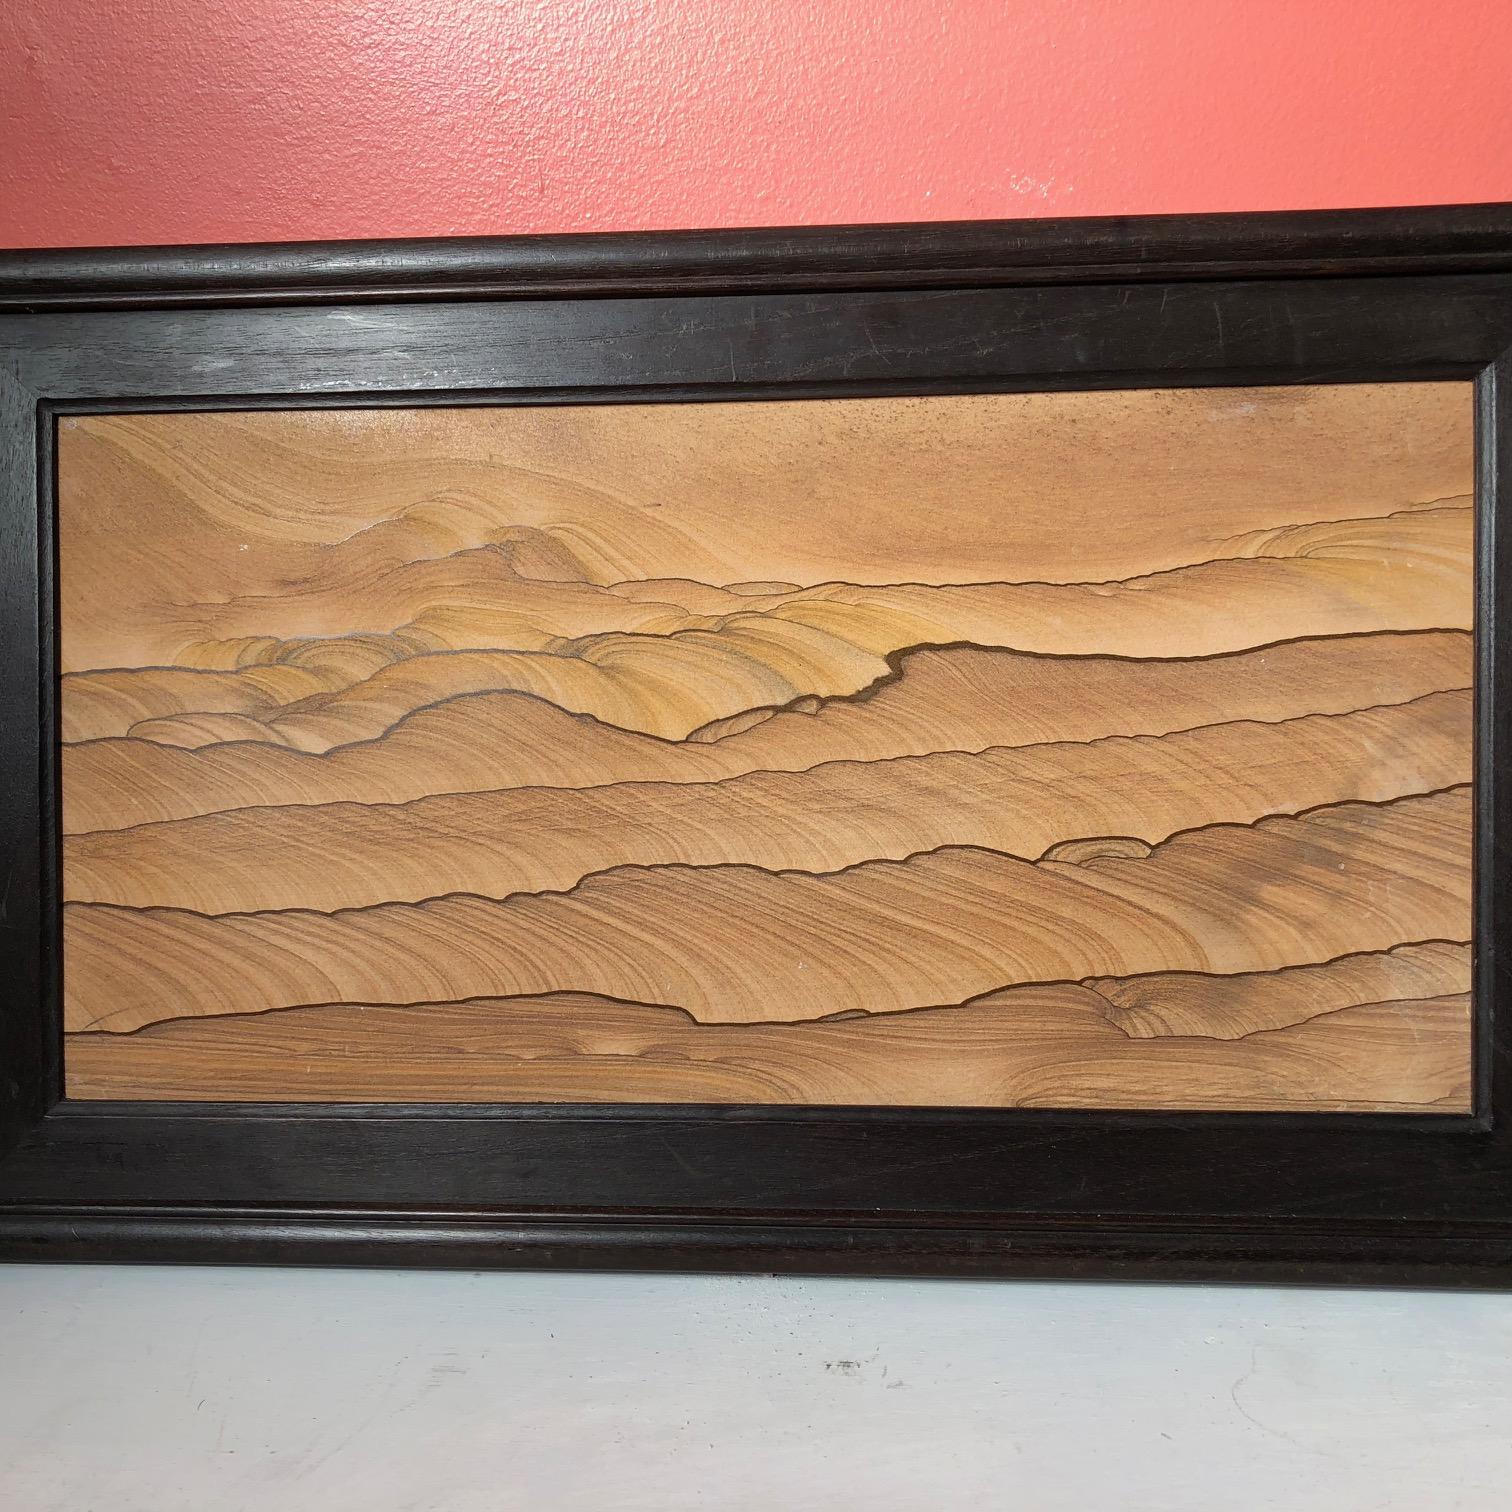 Extraordinary Natural work, one of a kind.

This Chinese extraordinary natural stone painting of a minimalist depiction of what appear to be sand dunes in natural sand and light colors. This is called a dream stone Shih-hua. They are cut from